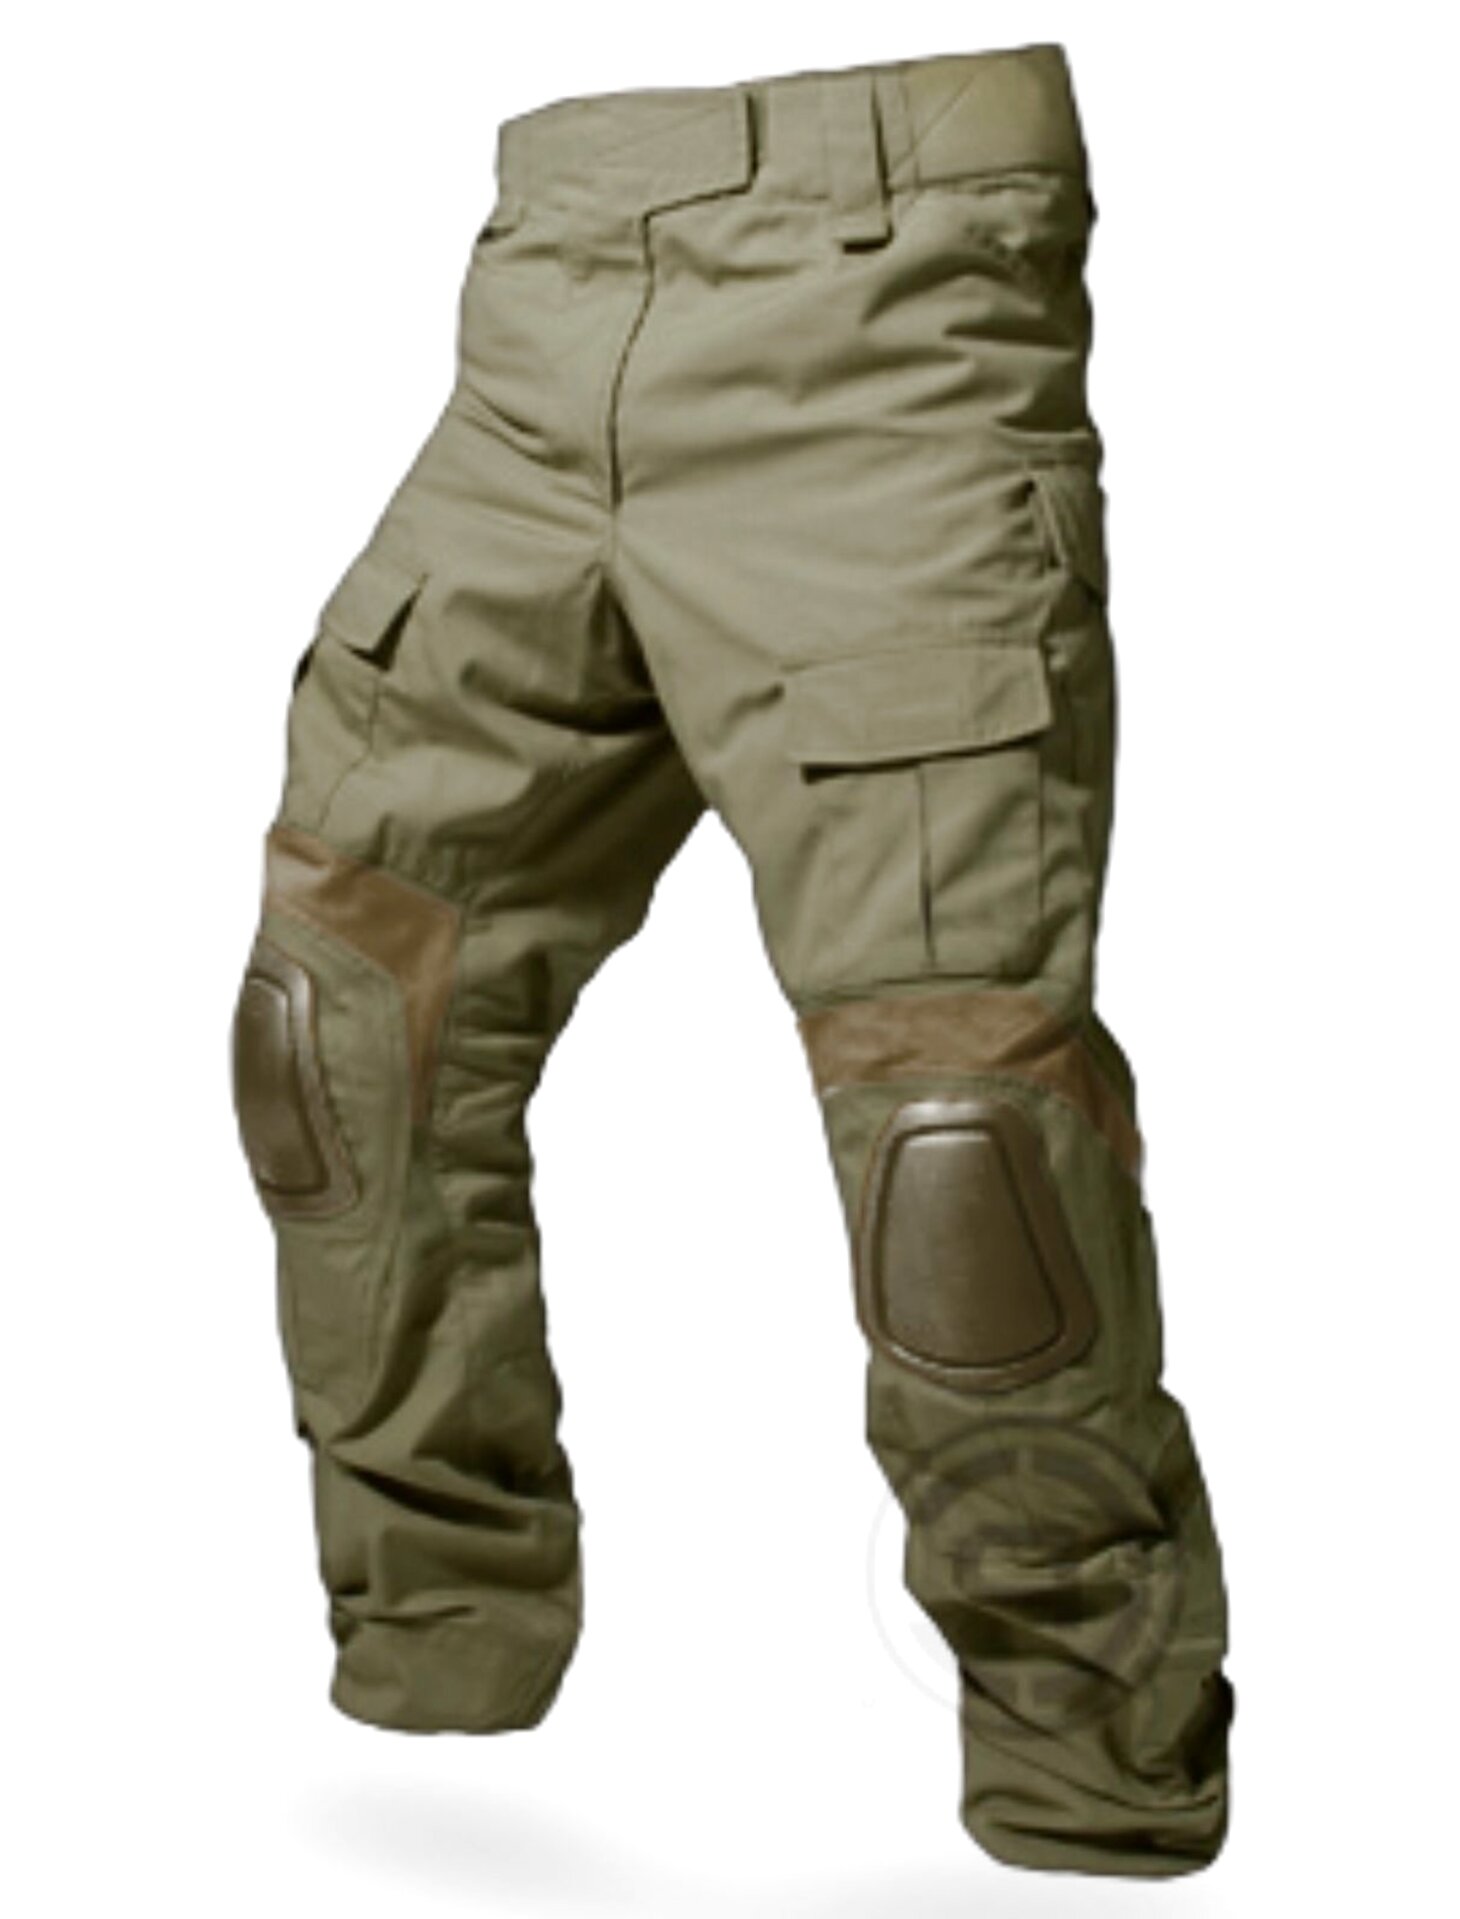 Crye Pants for sale in UK | 56 used Crye Pants